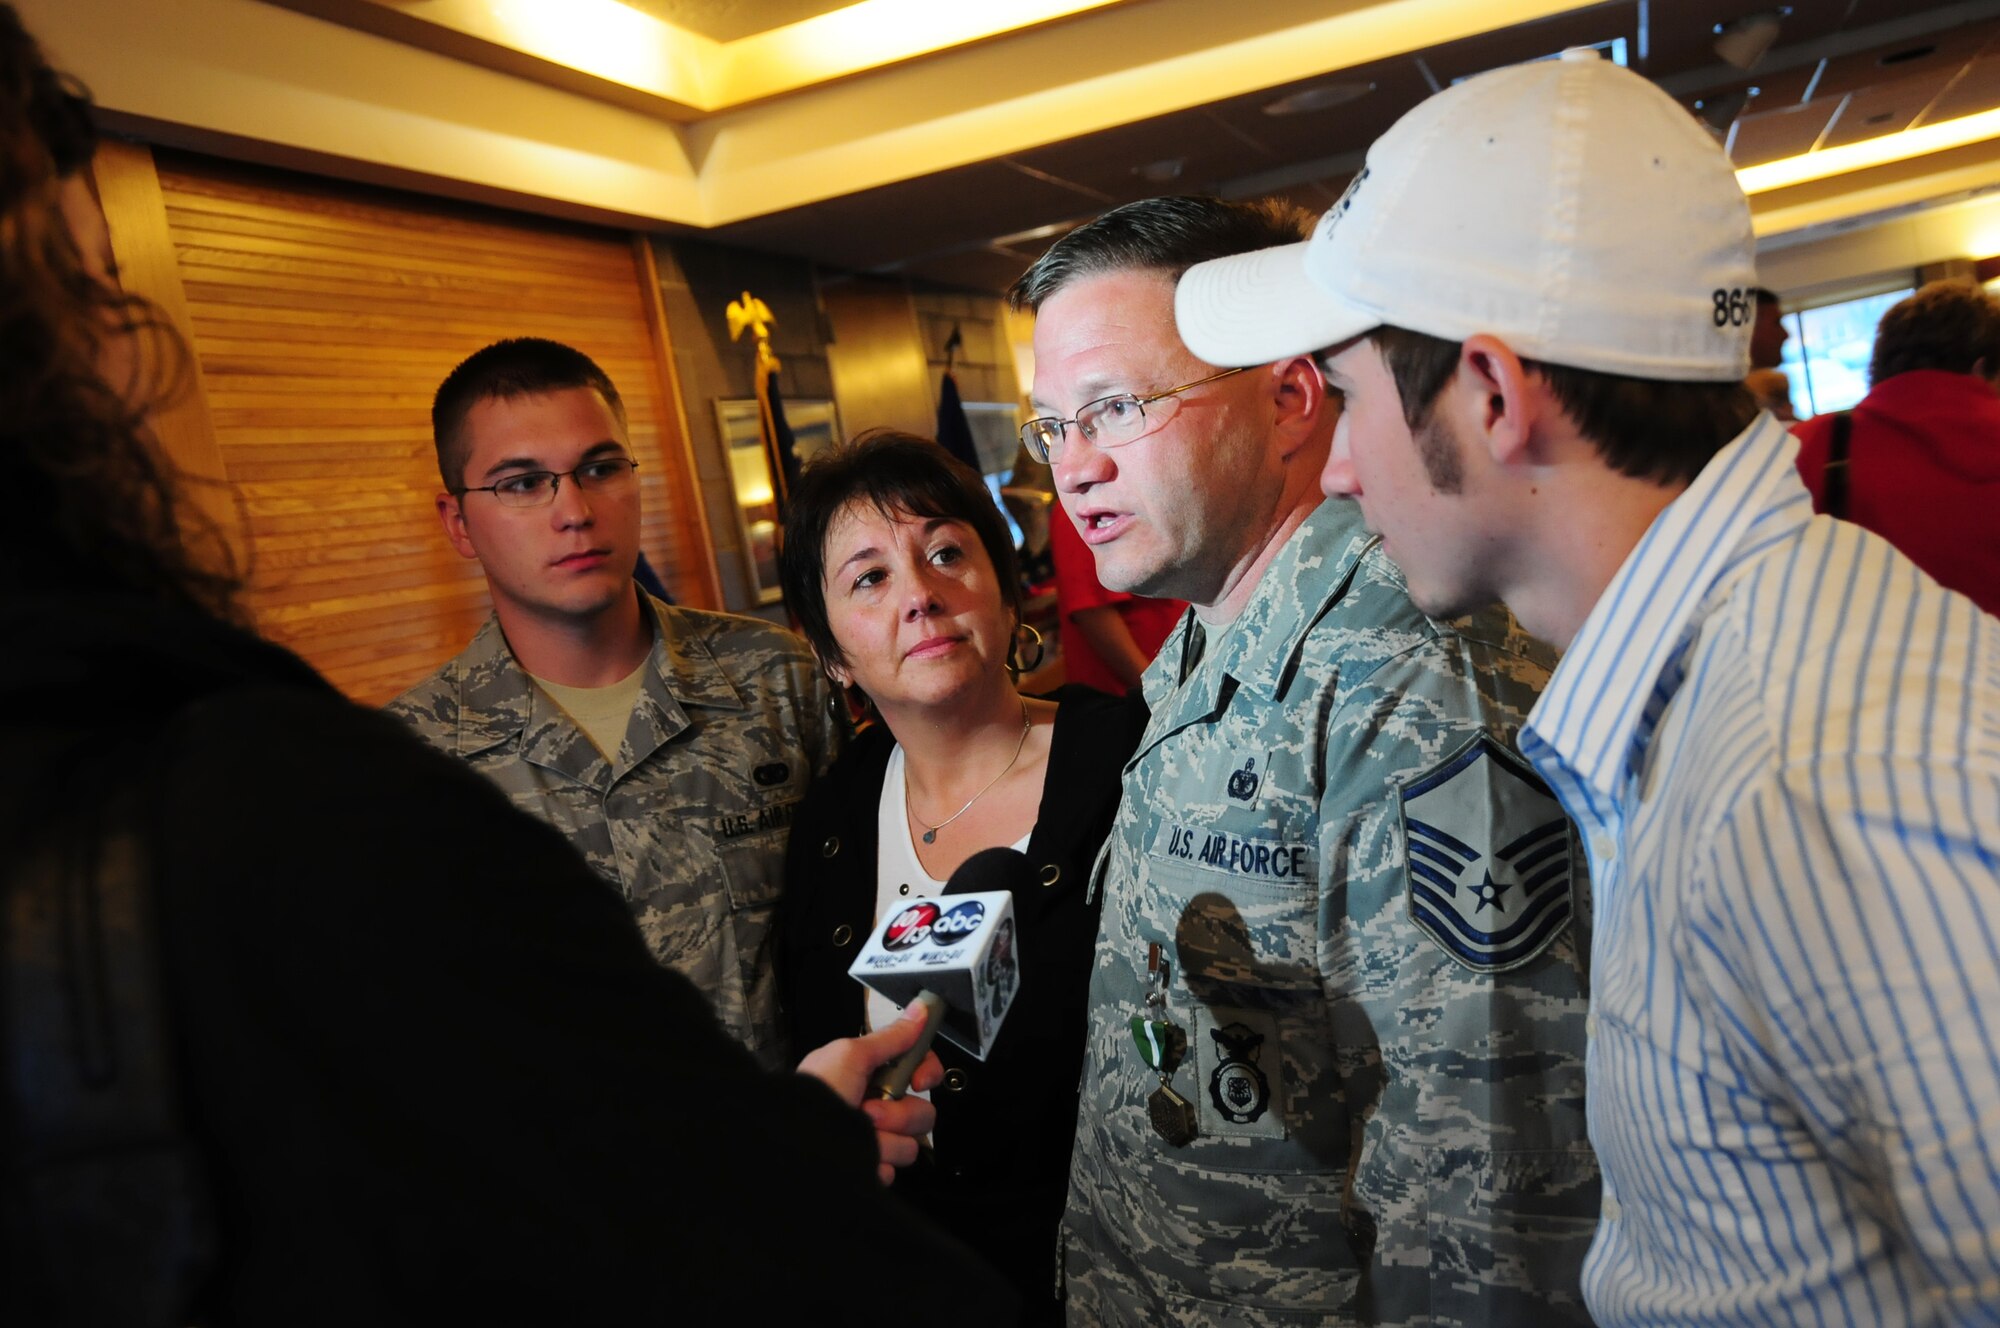 U.S. Air Force Master Sgt. William Hawley, 148th Fighter Wing Security Forces, speaks with a reporter after being reunited with his family at the Duluth, Minn., Air National Guard base May 13, 2010. Approximately 35 Air National Guard members of the 148th Fighter Wing Security Forces Squadron returned to Duluth, Minn., after a 6-month deployment in southwest Asia. (U.S. Air Force photo by Master Sgt. Jason W. Rolfe/Released)